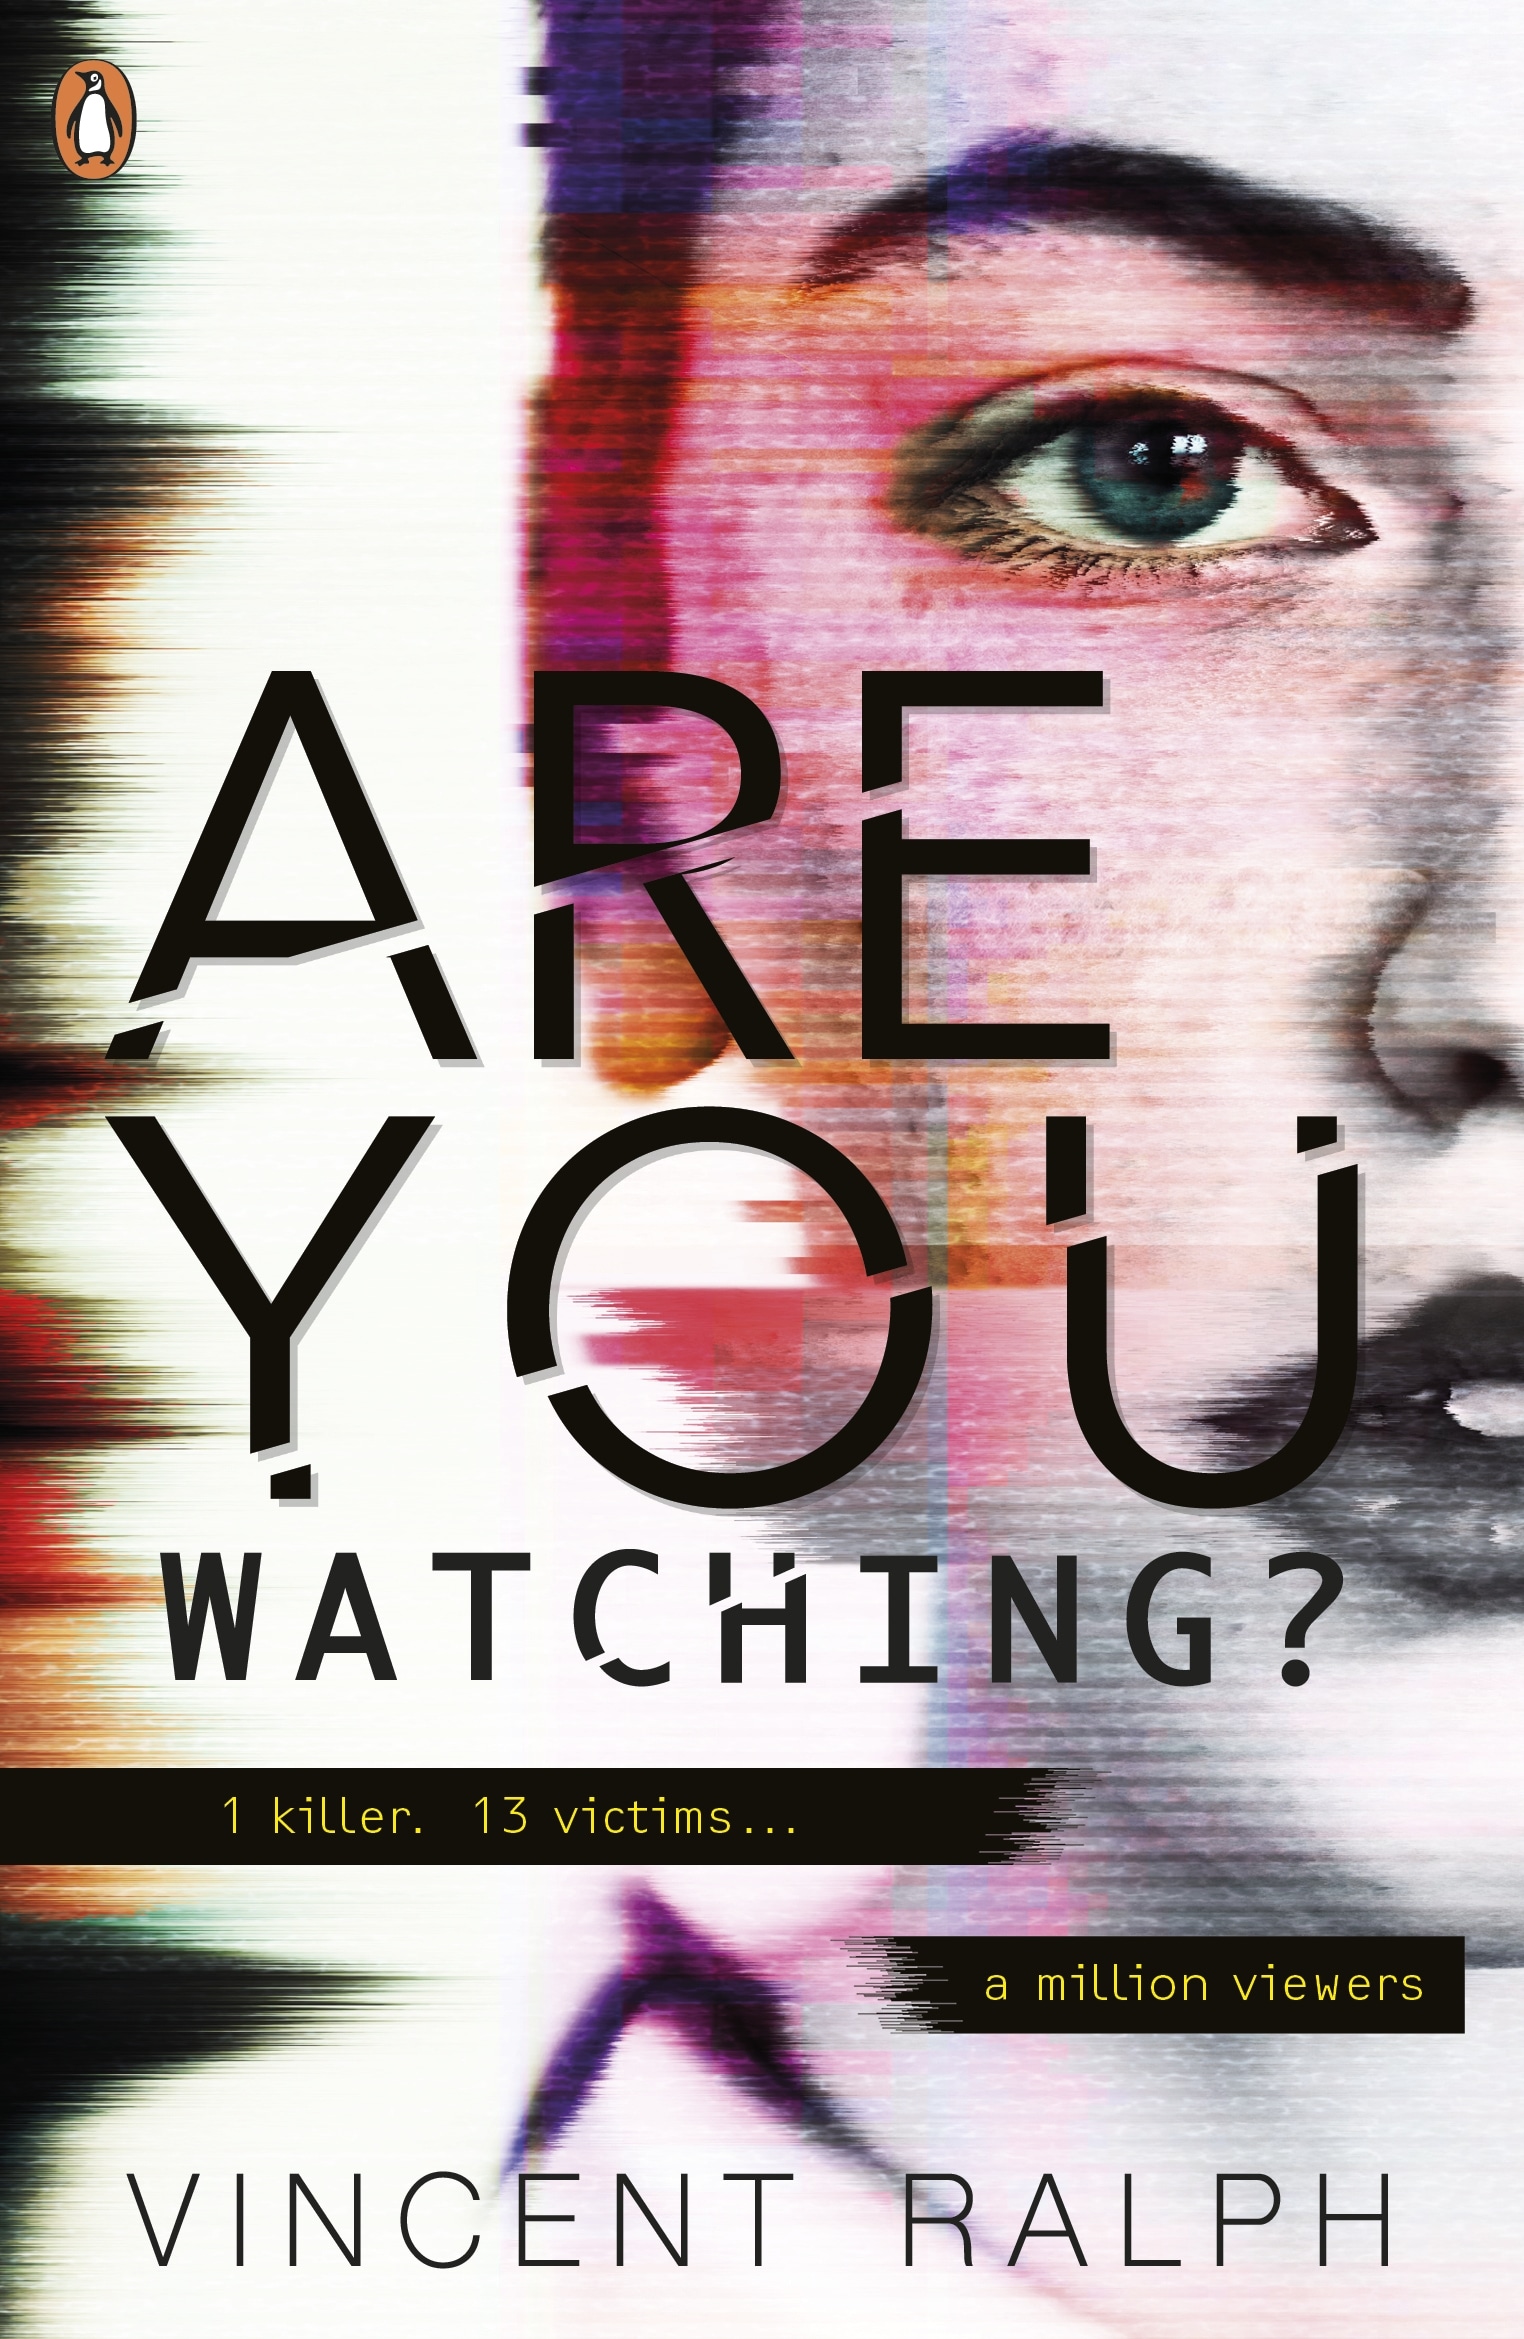 Book “Are You Watching?” by Vincent Ralph — February 6, 2020